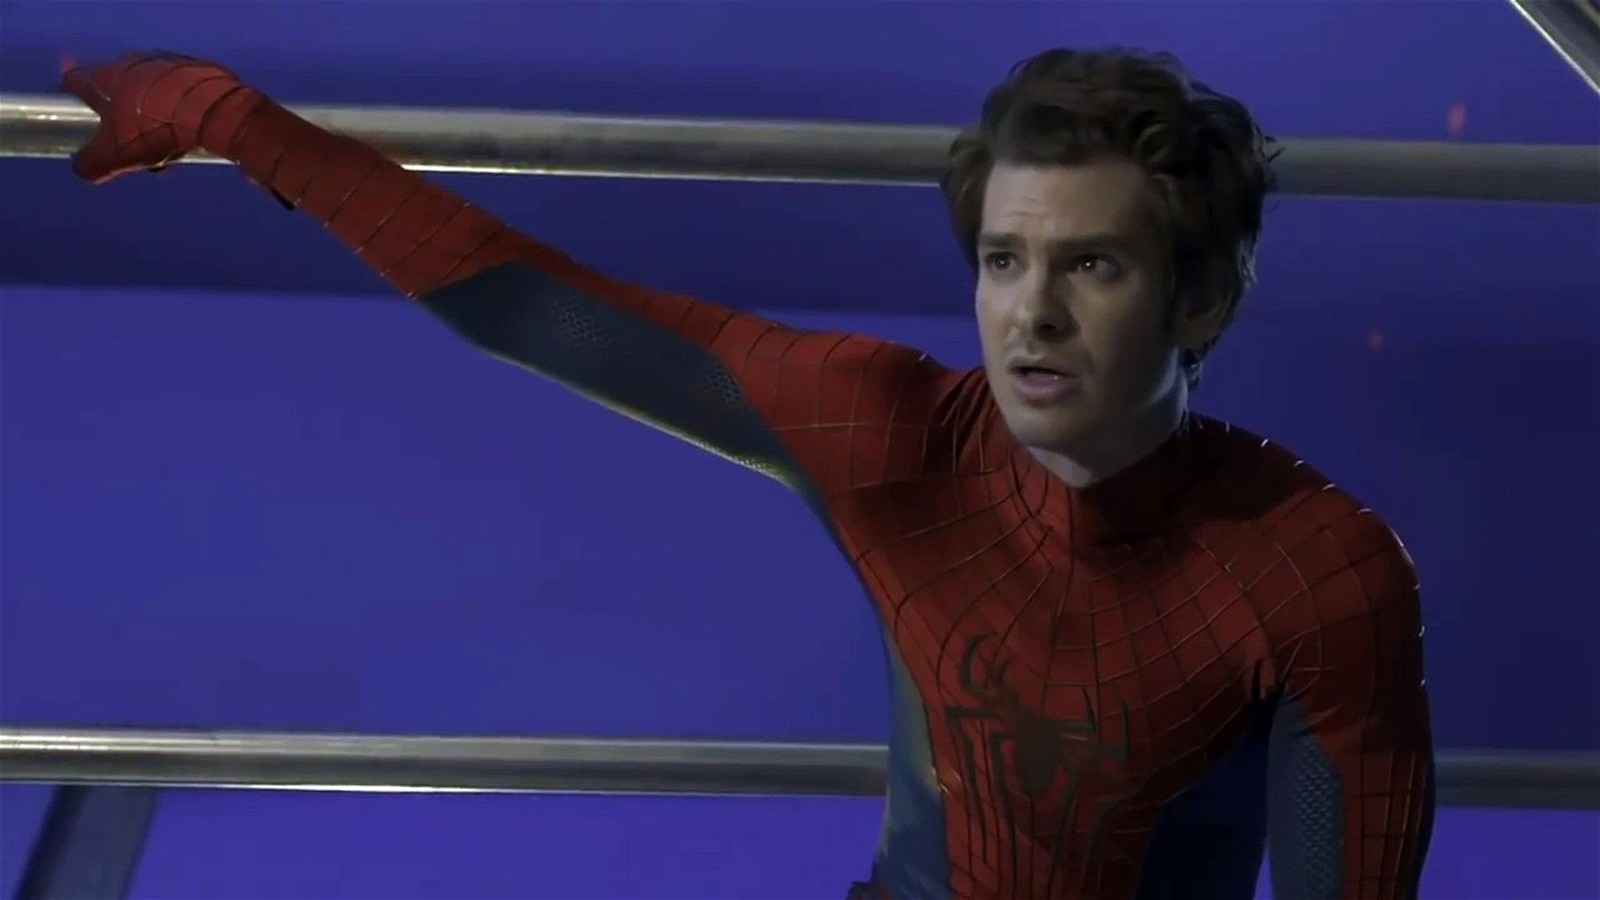 Screen-grab of Andrew Garfield in action as Spider-Man from the Spider-Man: No Way Home leak